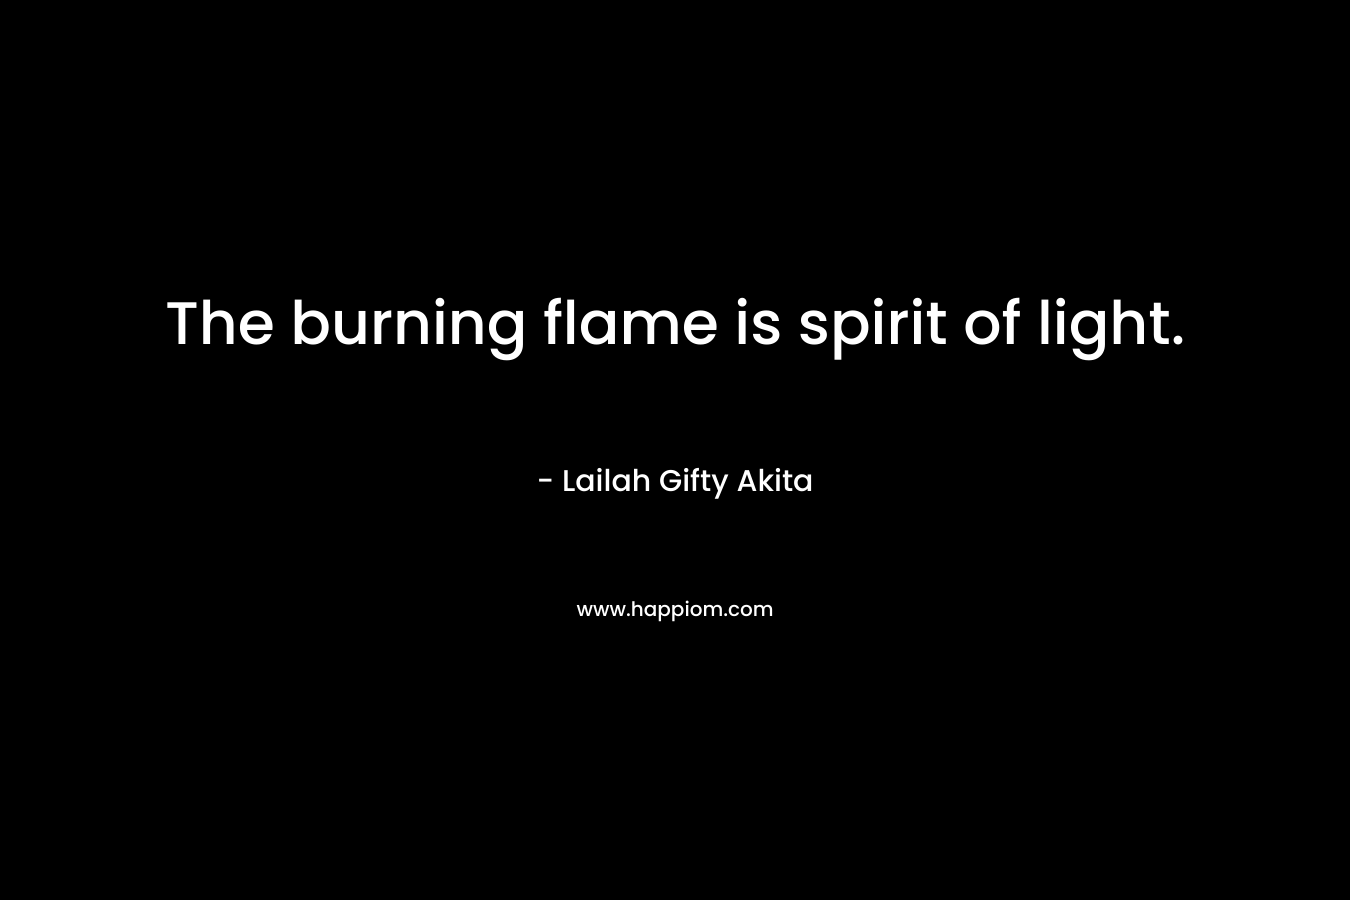 The burning flame is spirit of light.